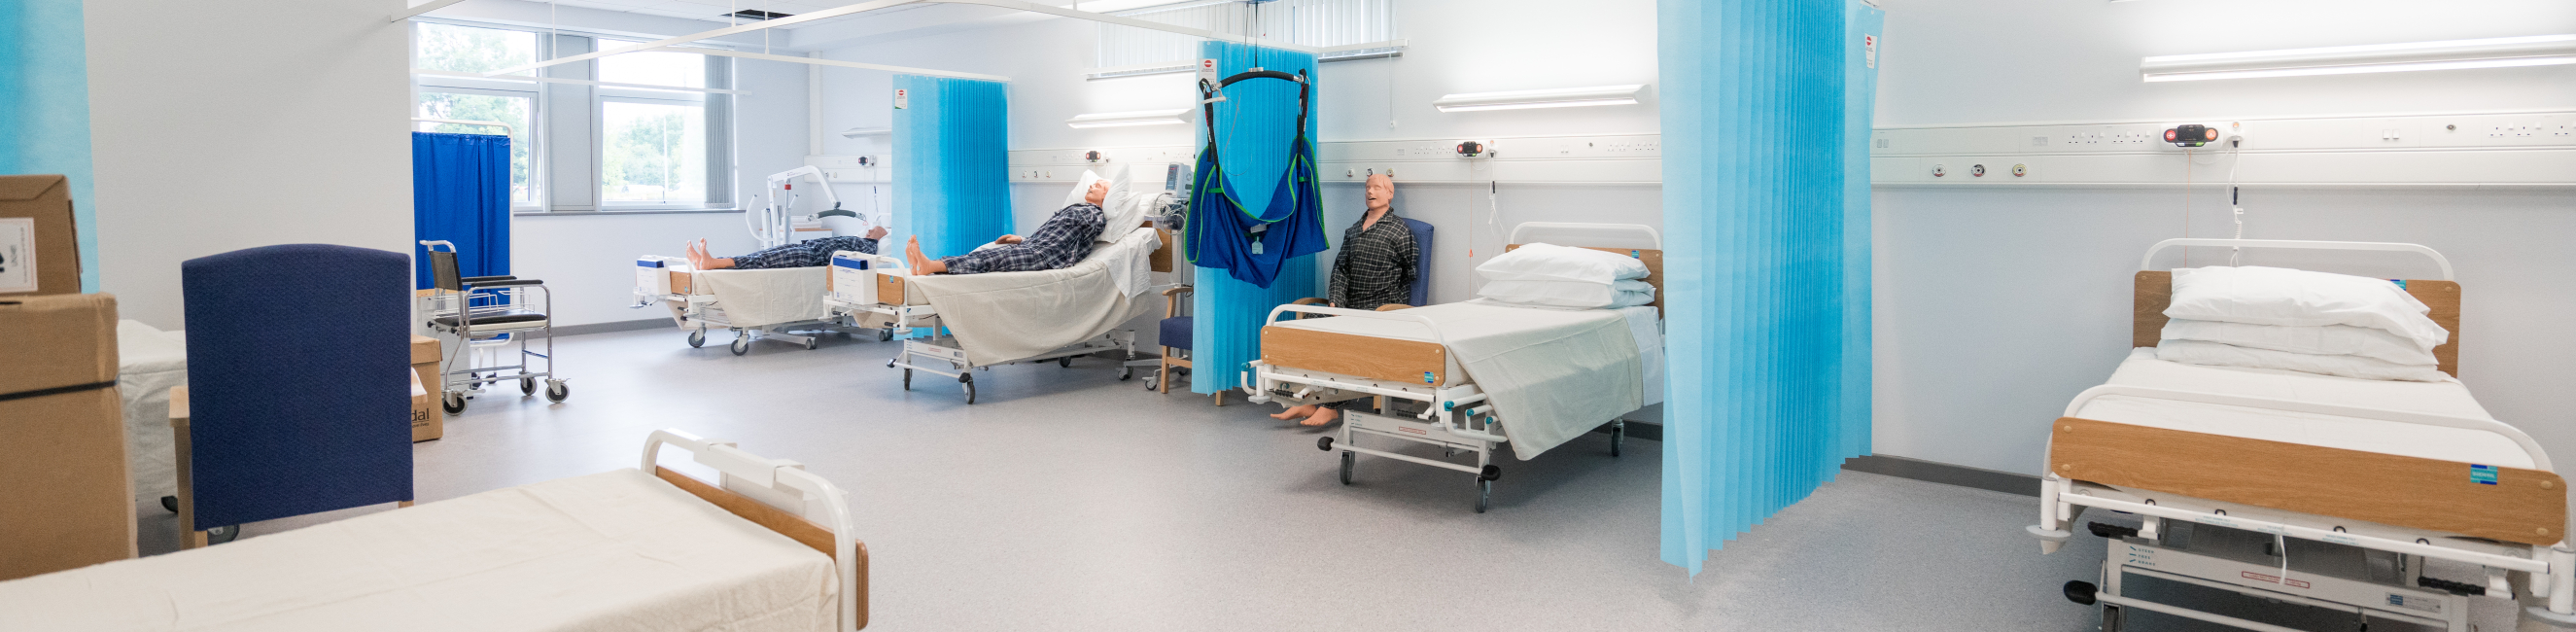 Simulation Room in Health and Social Care